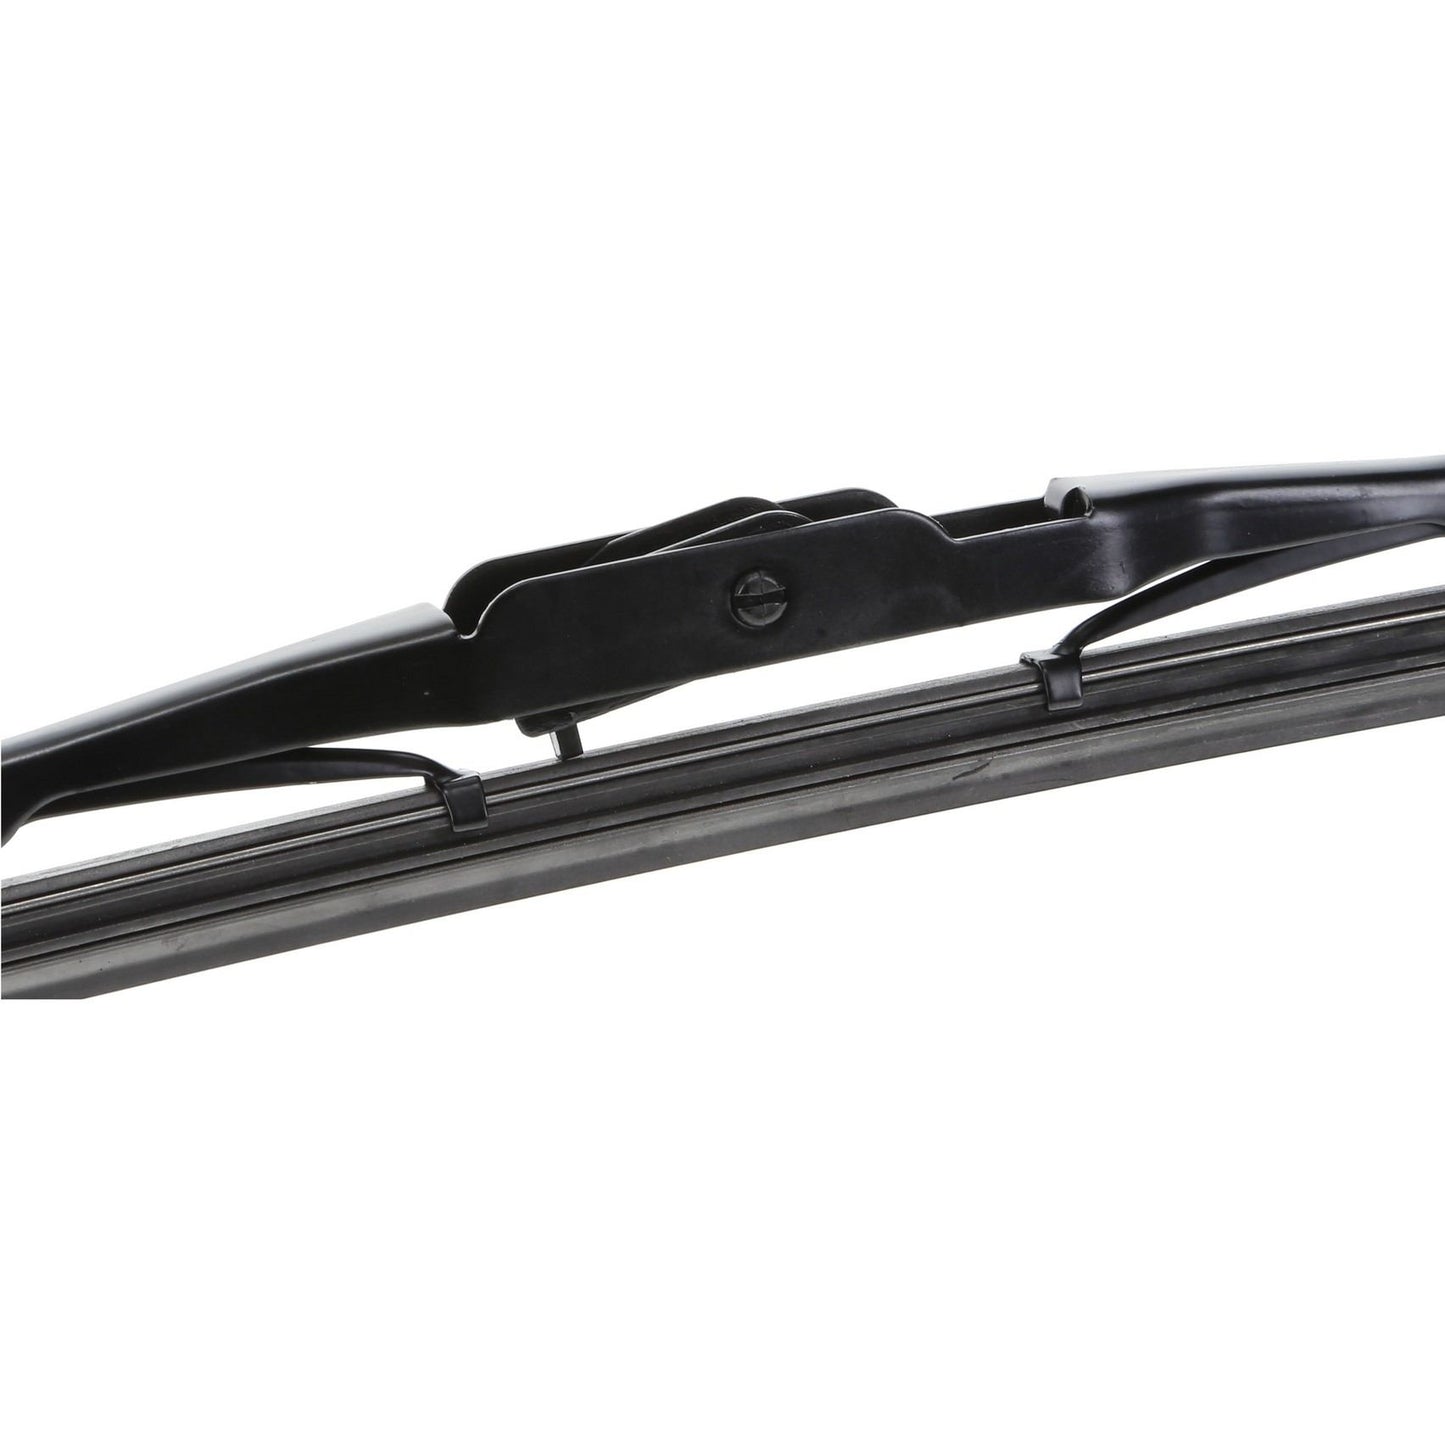 Other View of Rear Windshield Wiper Blade ANCO 31-10